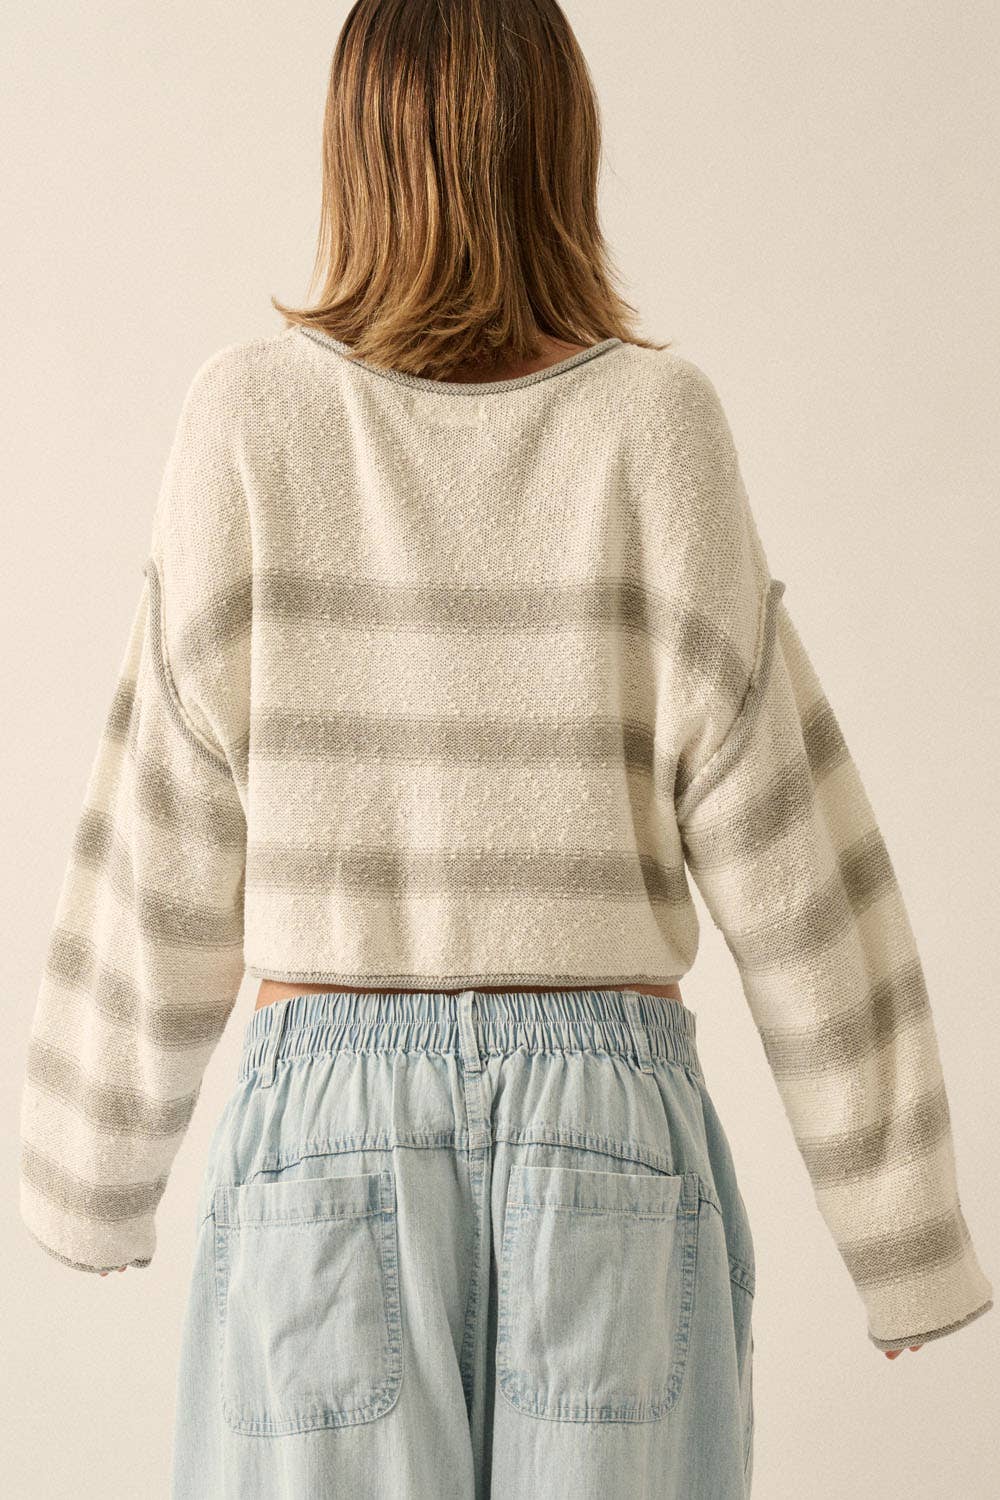 Striped Exposed-Seam Cropped Sweater